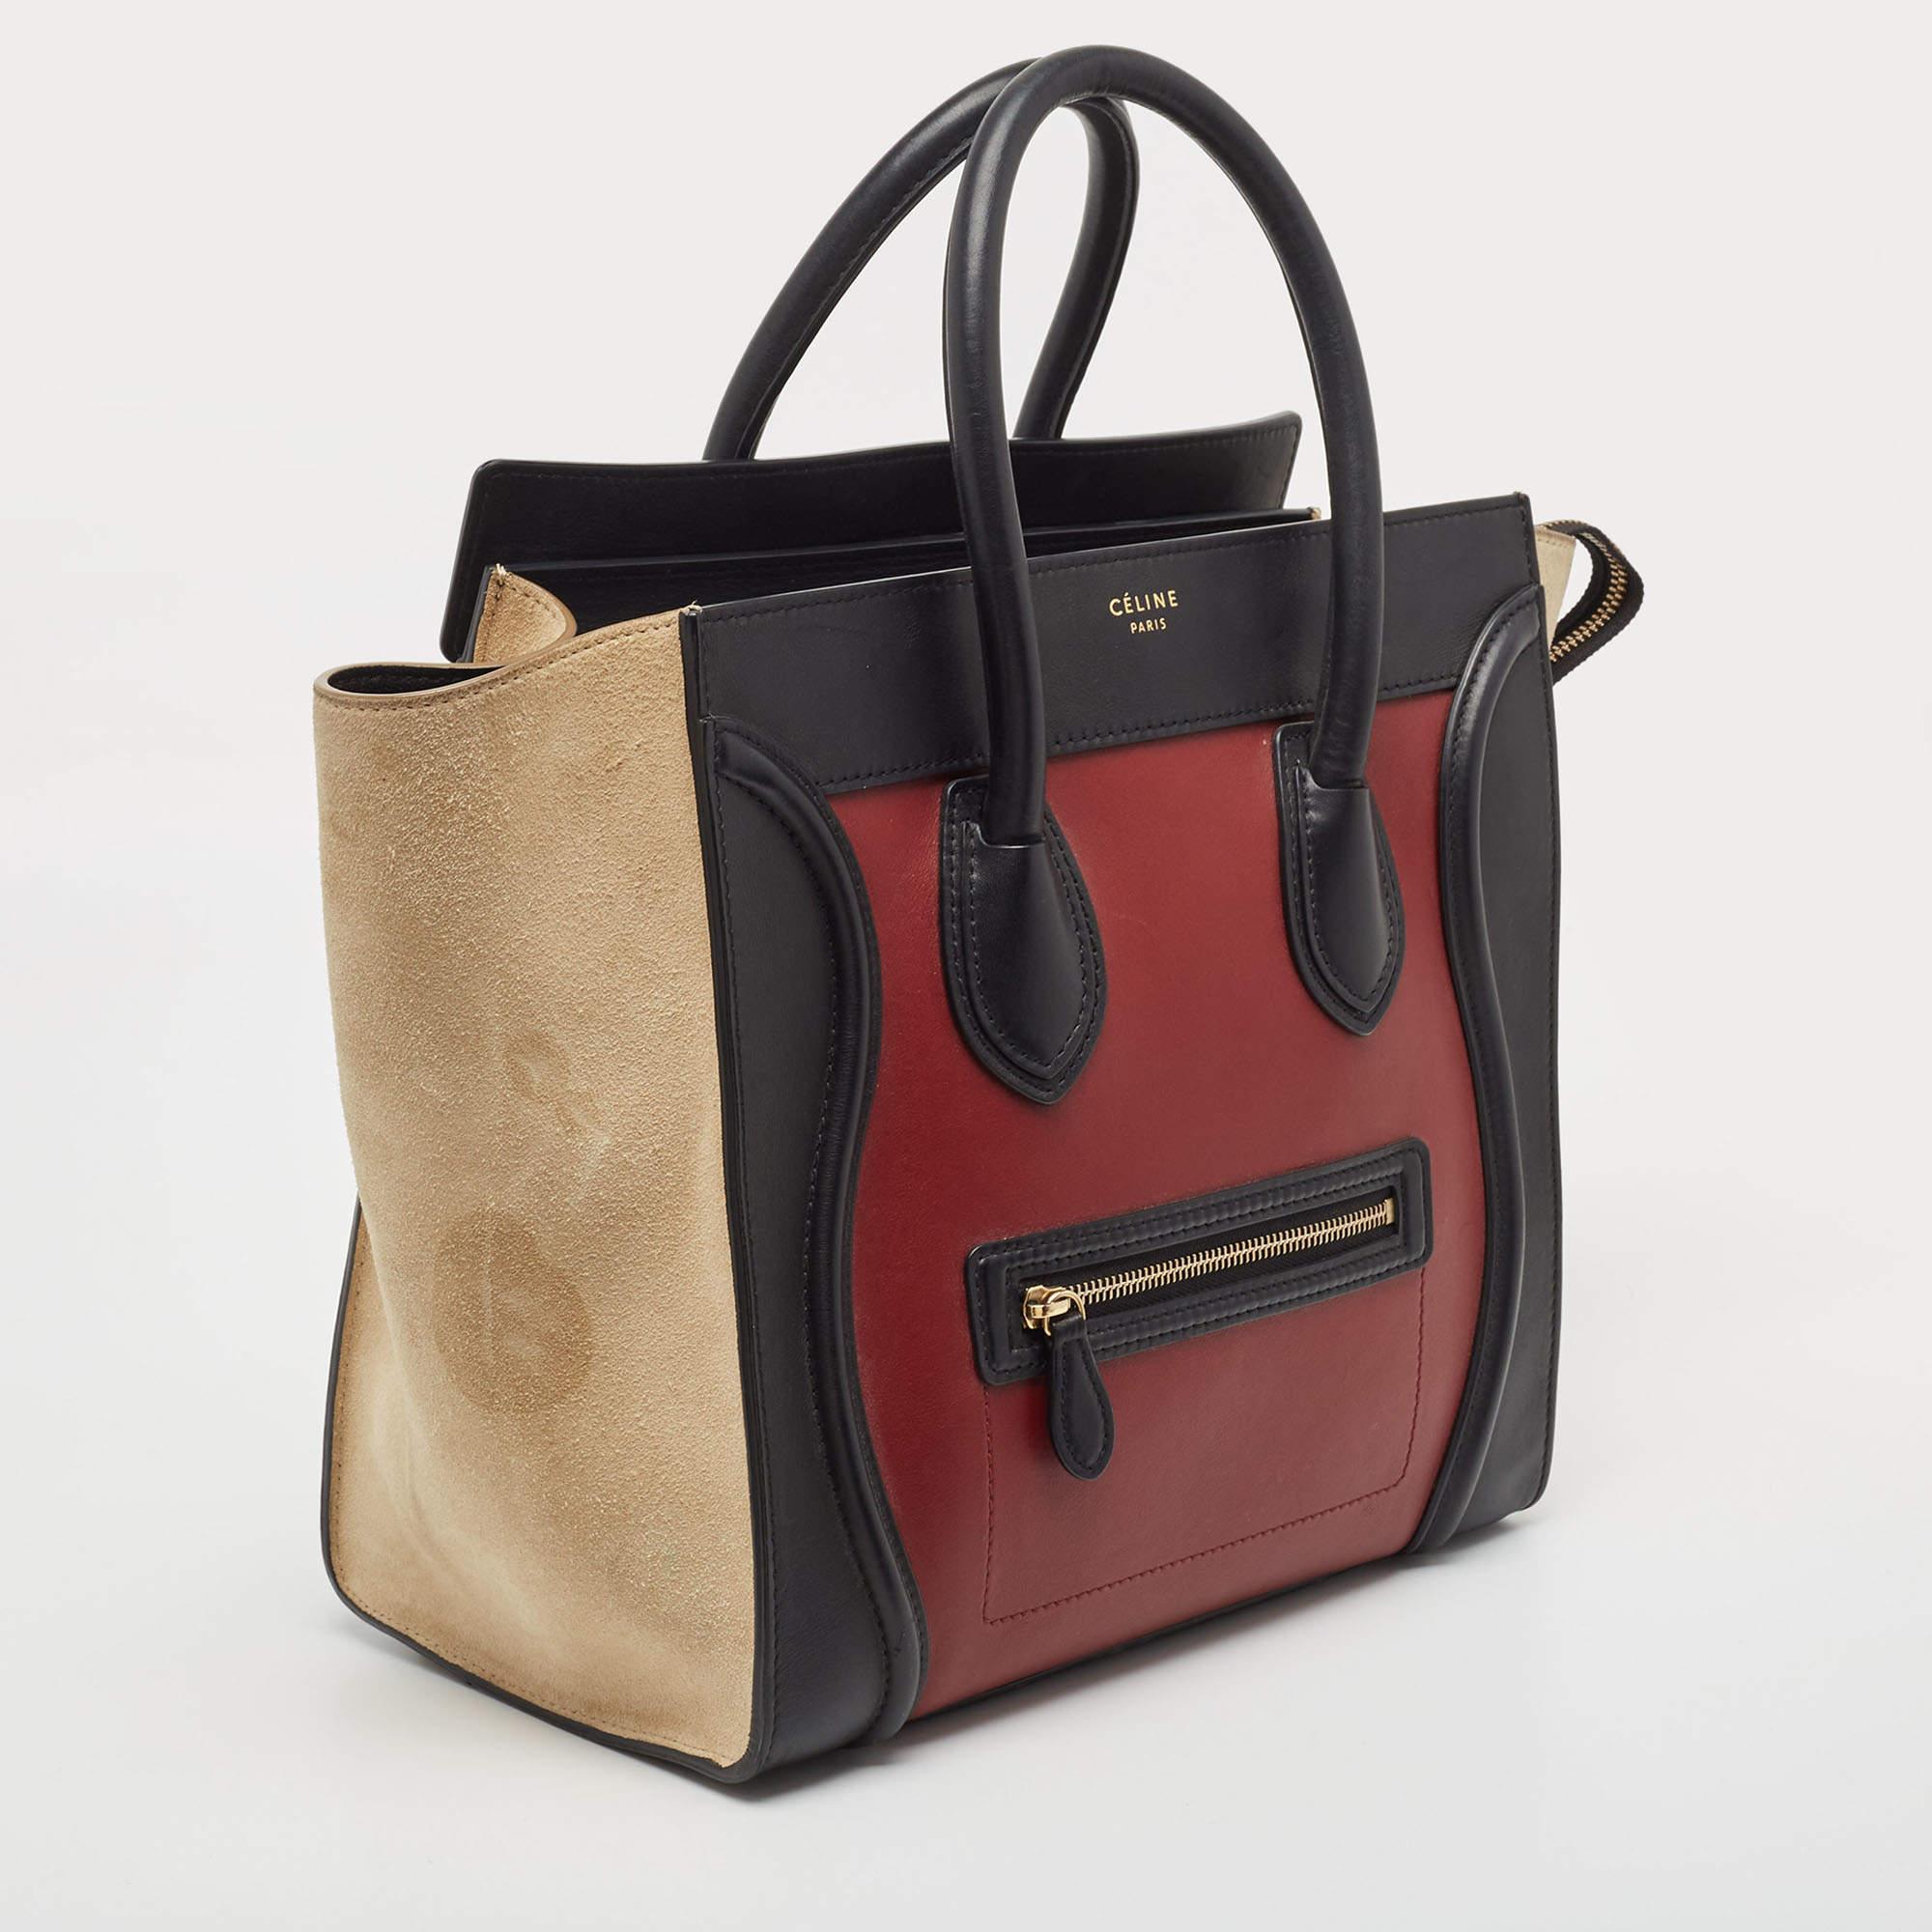 Celine Tricolor Leather and Suede Mini Luggage Tote For Sale 5